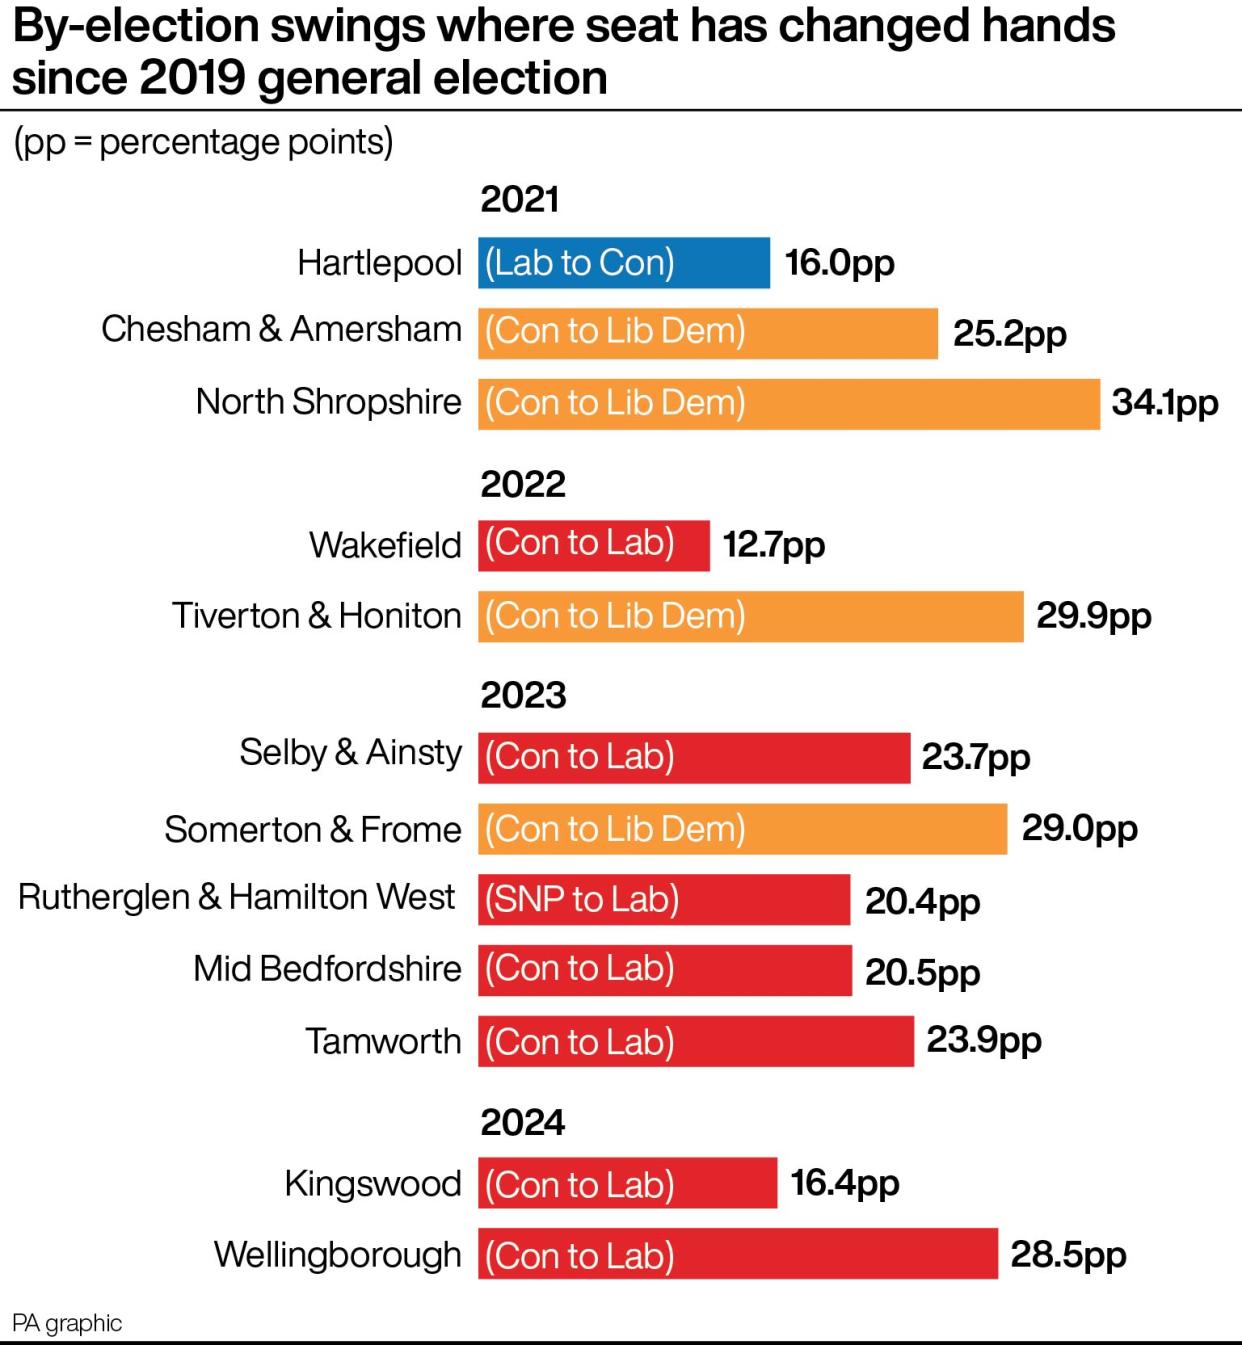 By-election swings where seat has changed hands since 2019 general election.